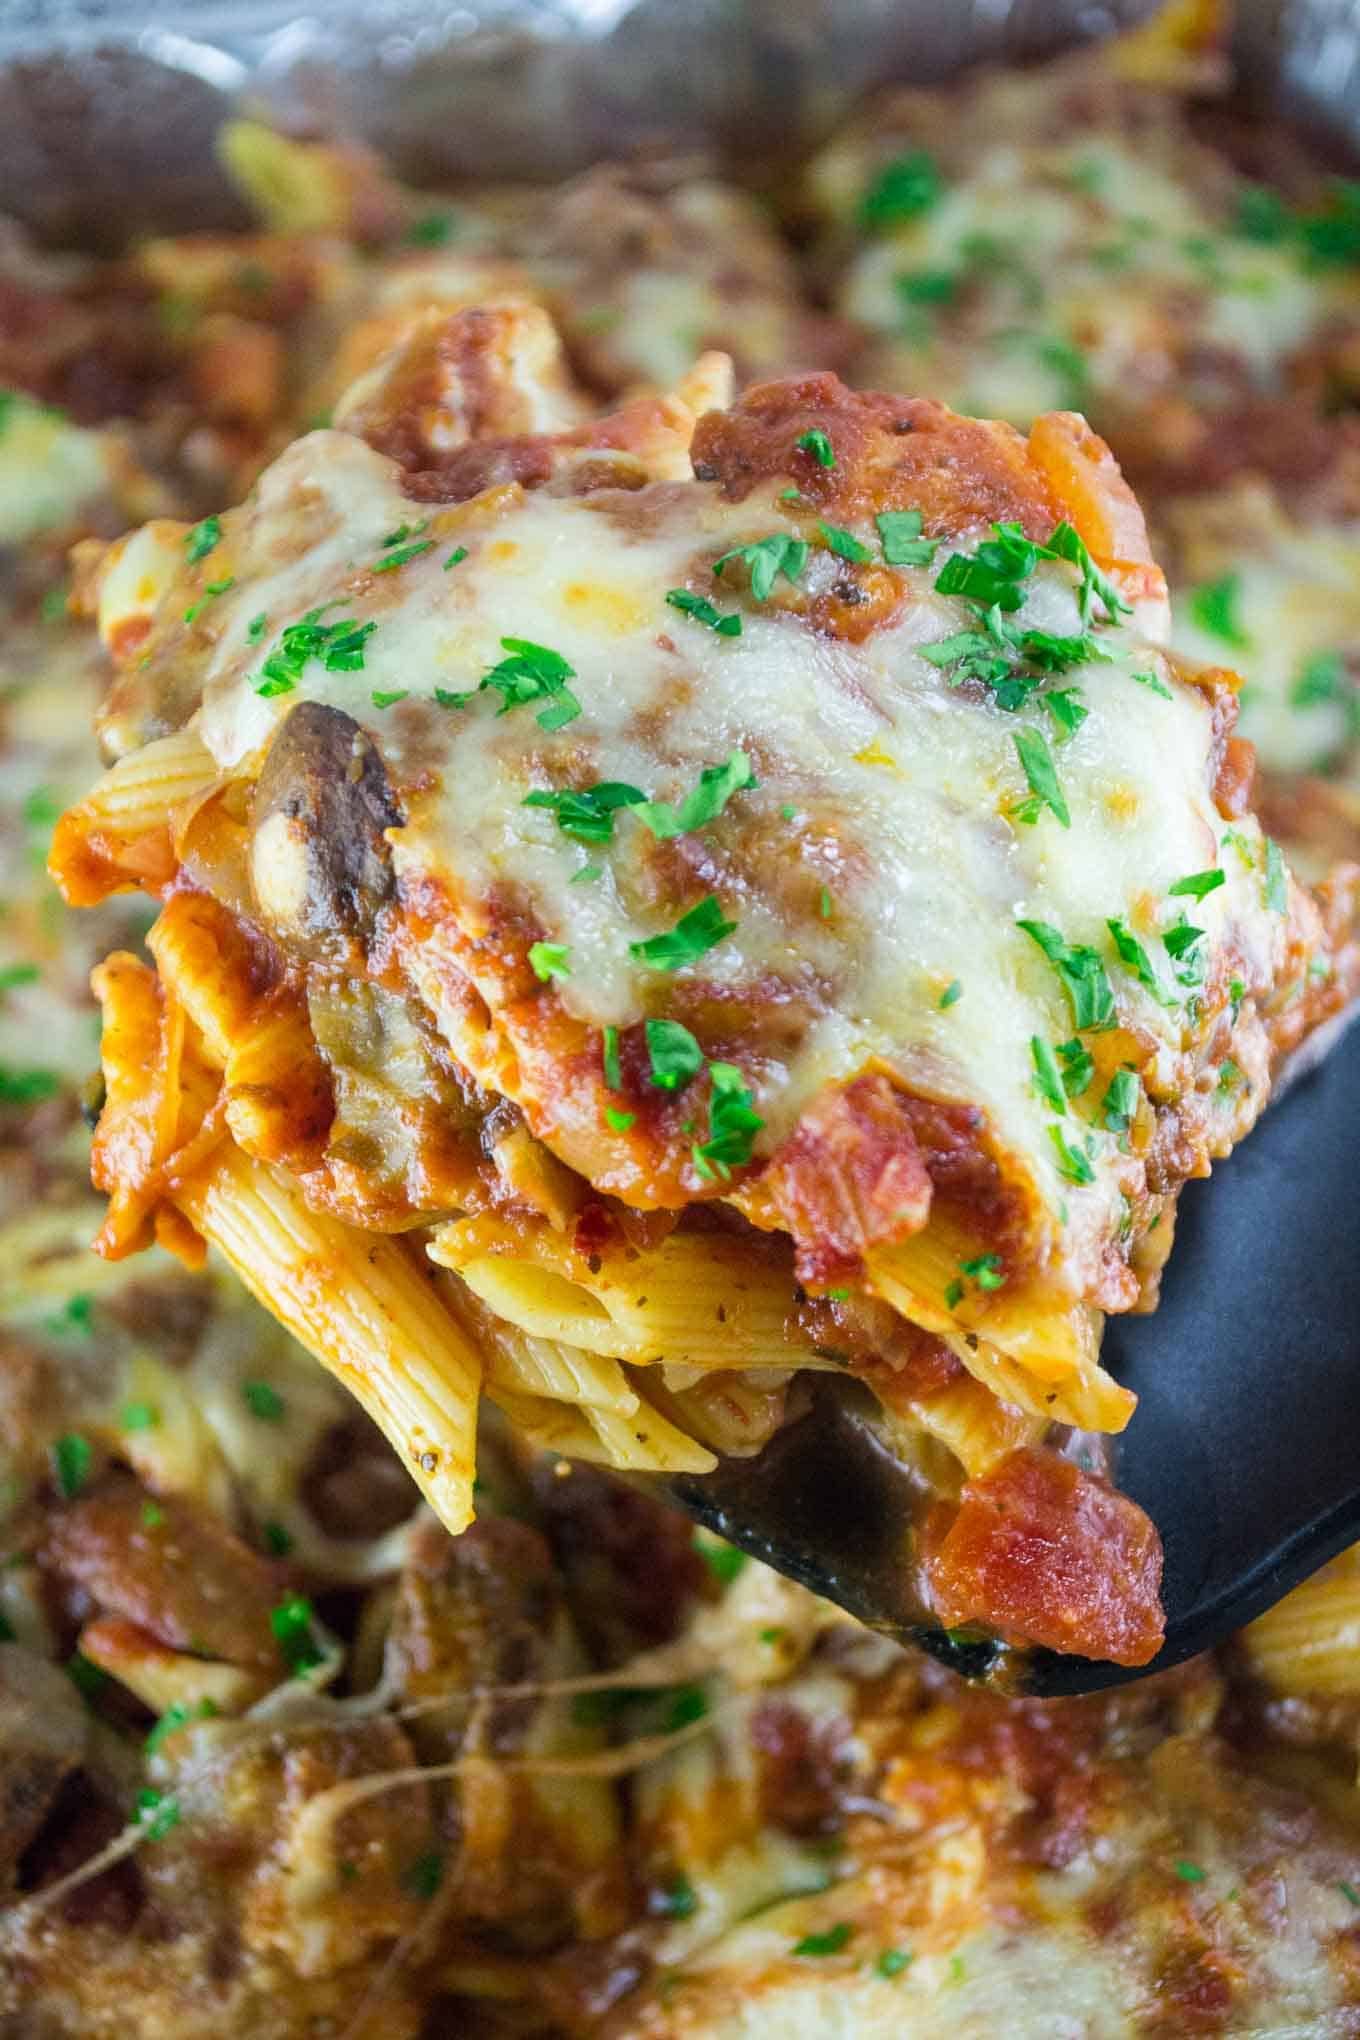 Freezer Friendly Oven Baked Ziti – an easy and delicious make ahead meal that can be frozen for later or cooked right away!